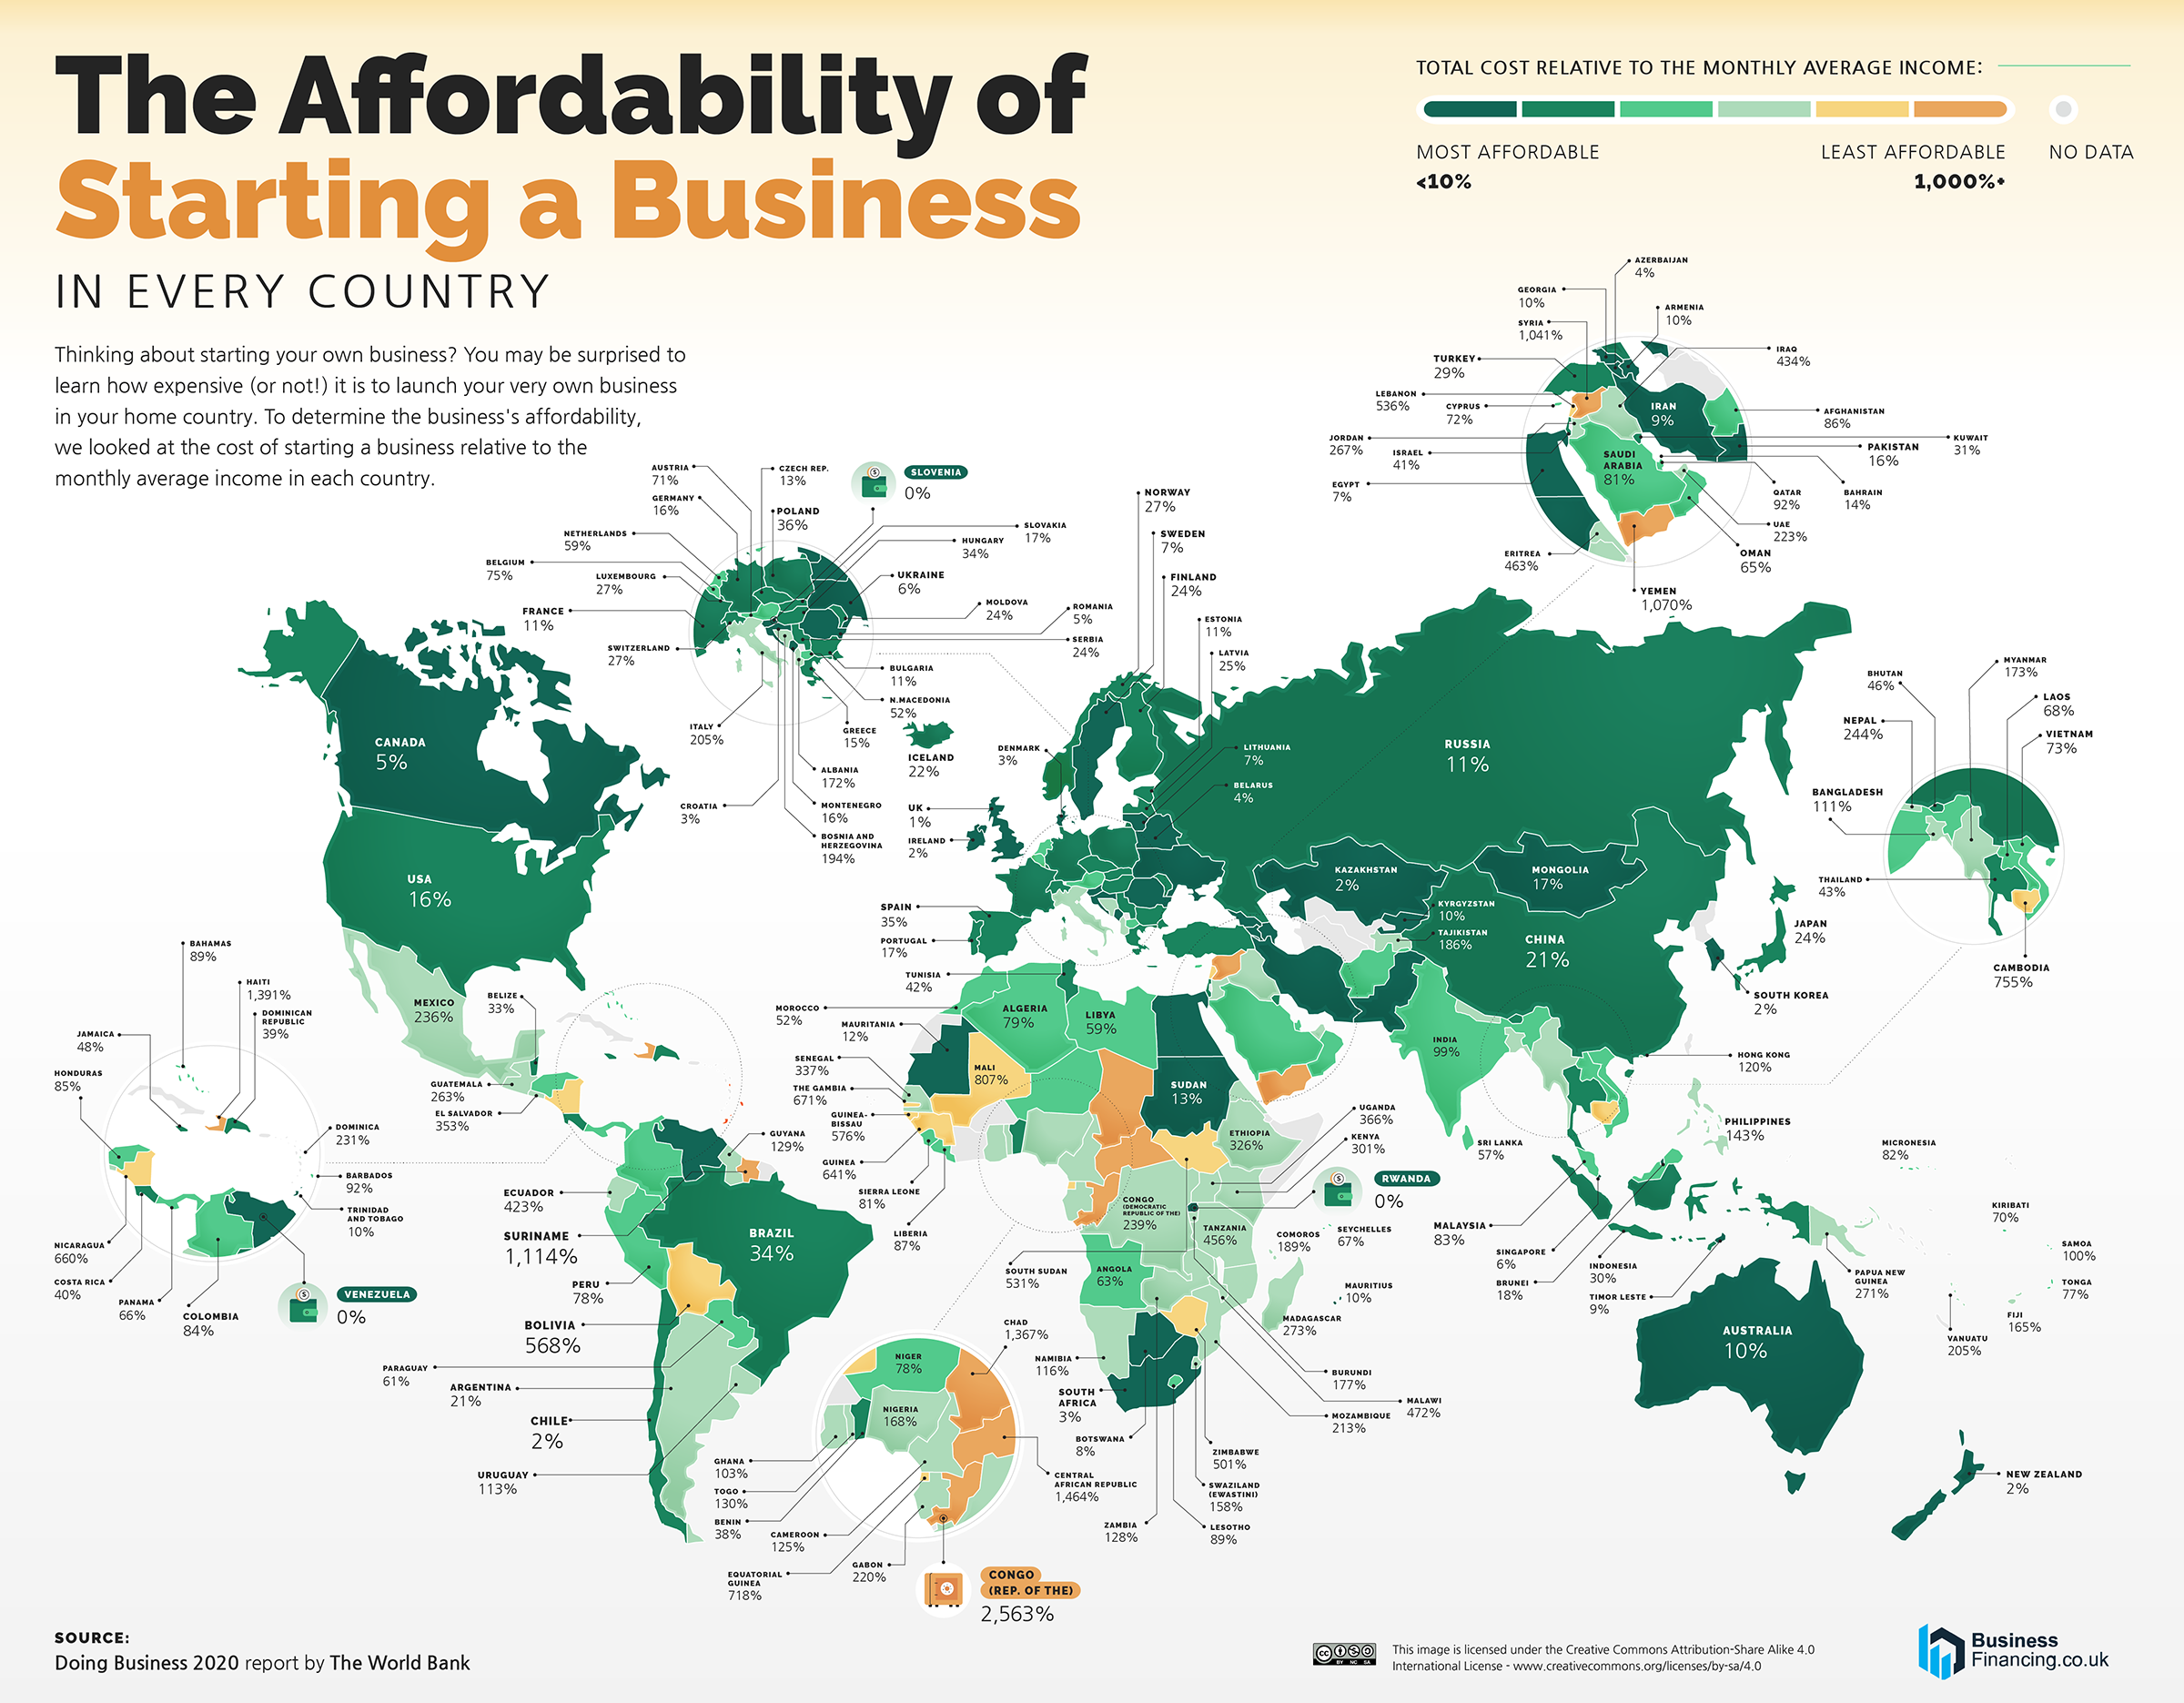 Affordability of Starting A Business By Country